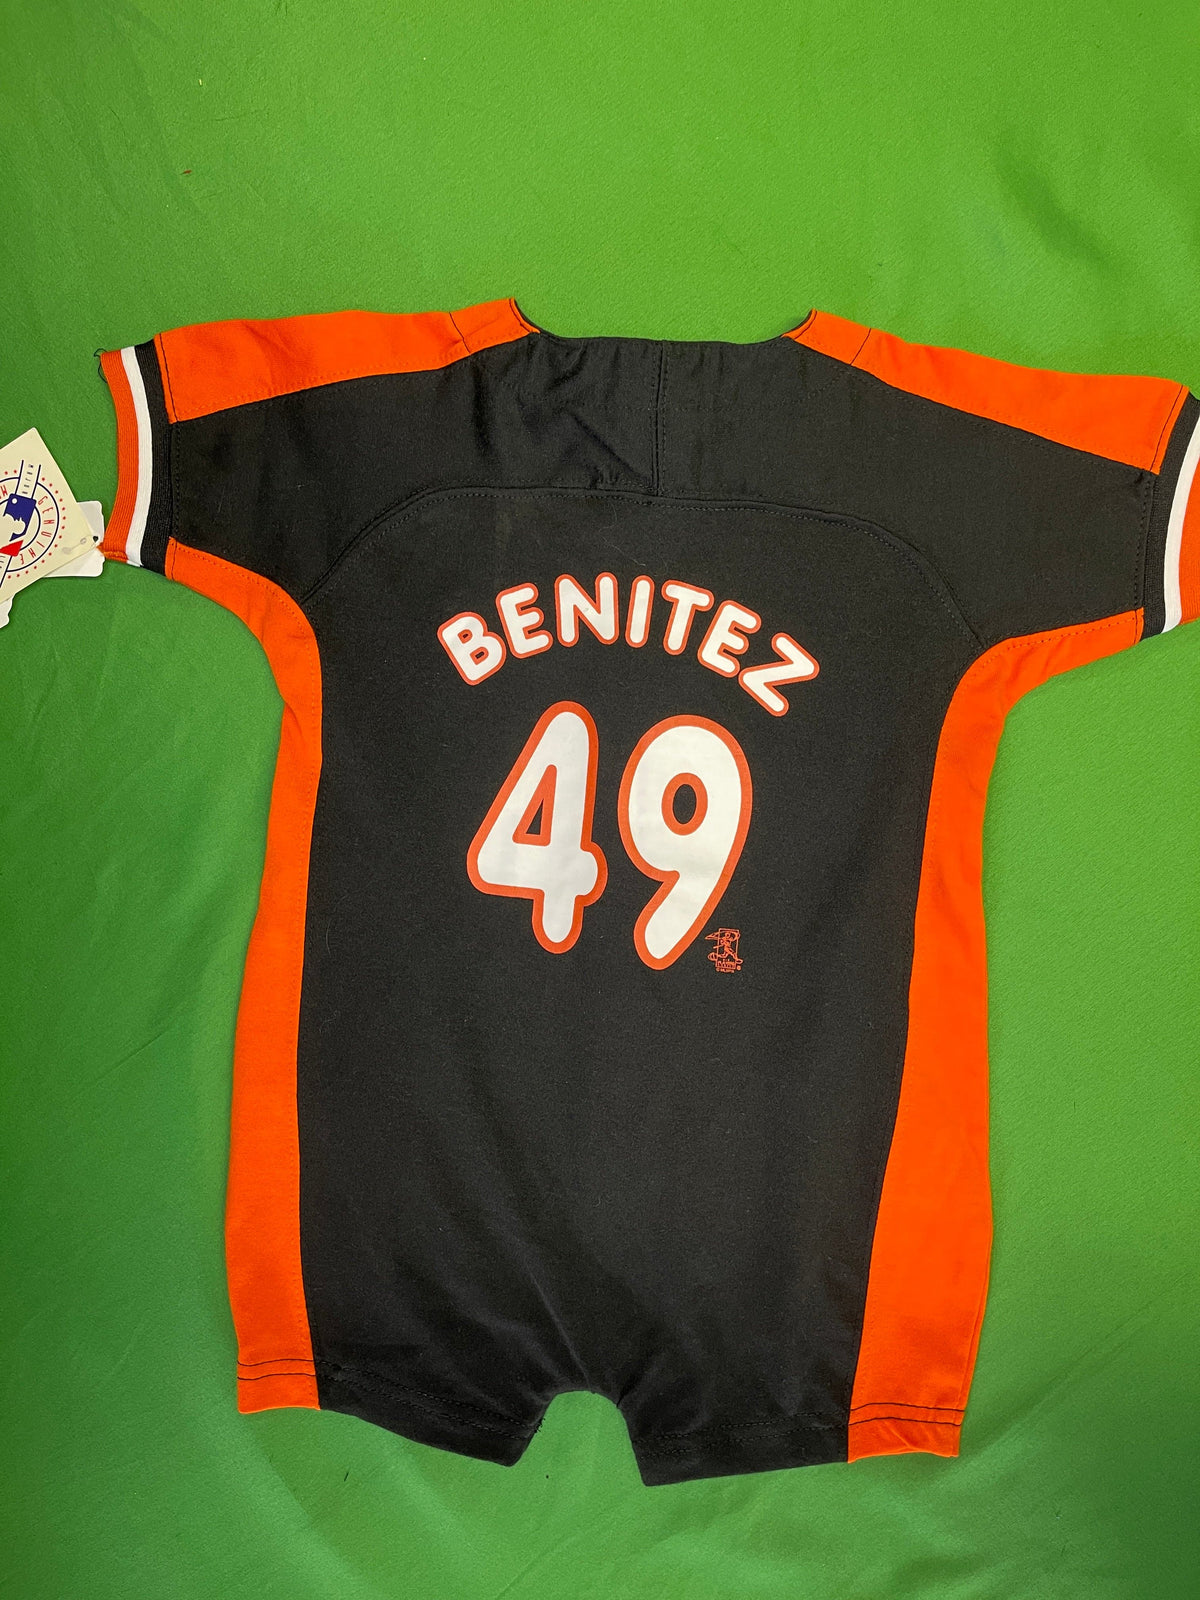 MLB San Francisco Giants Benitez Jersey-Style Play Outfit Toddler 18 Months NWT